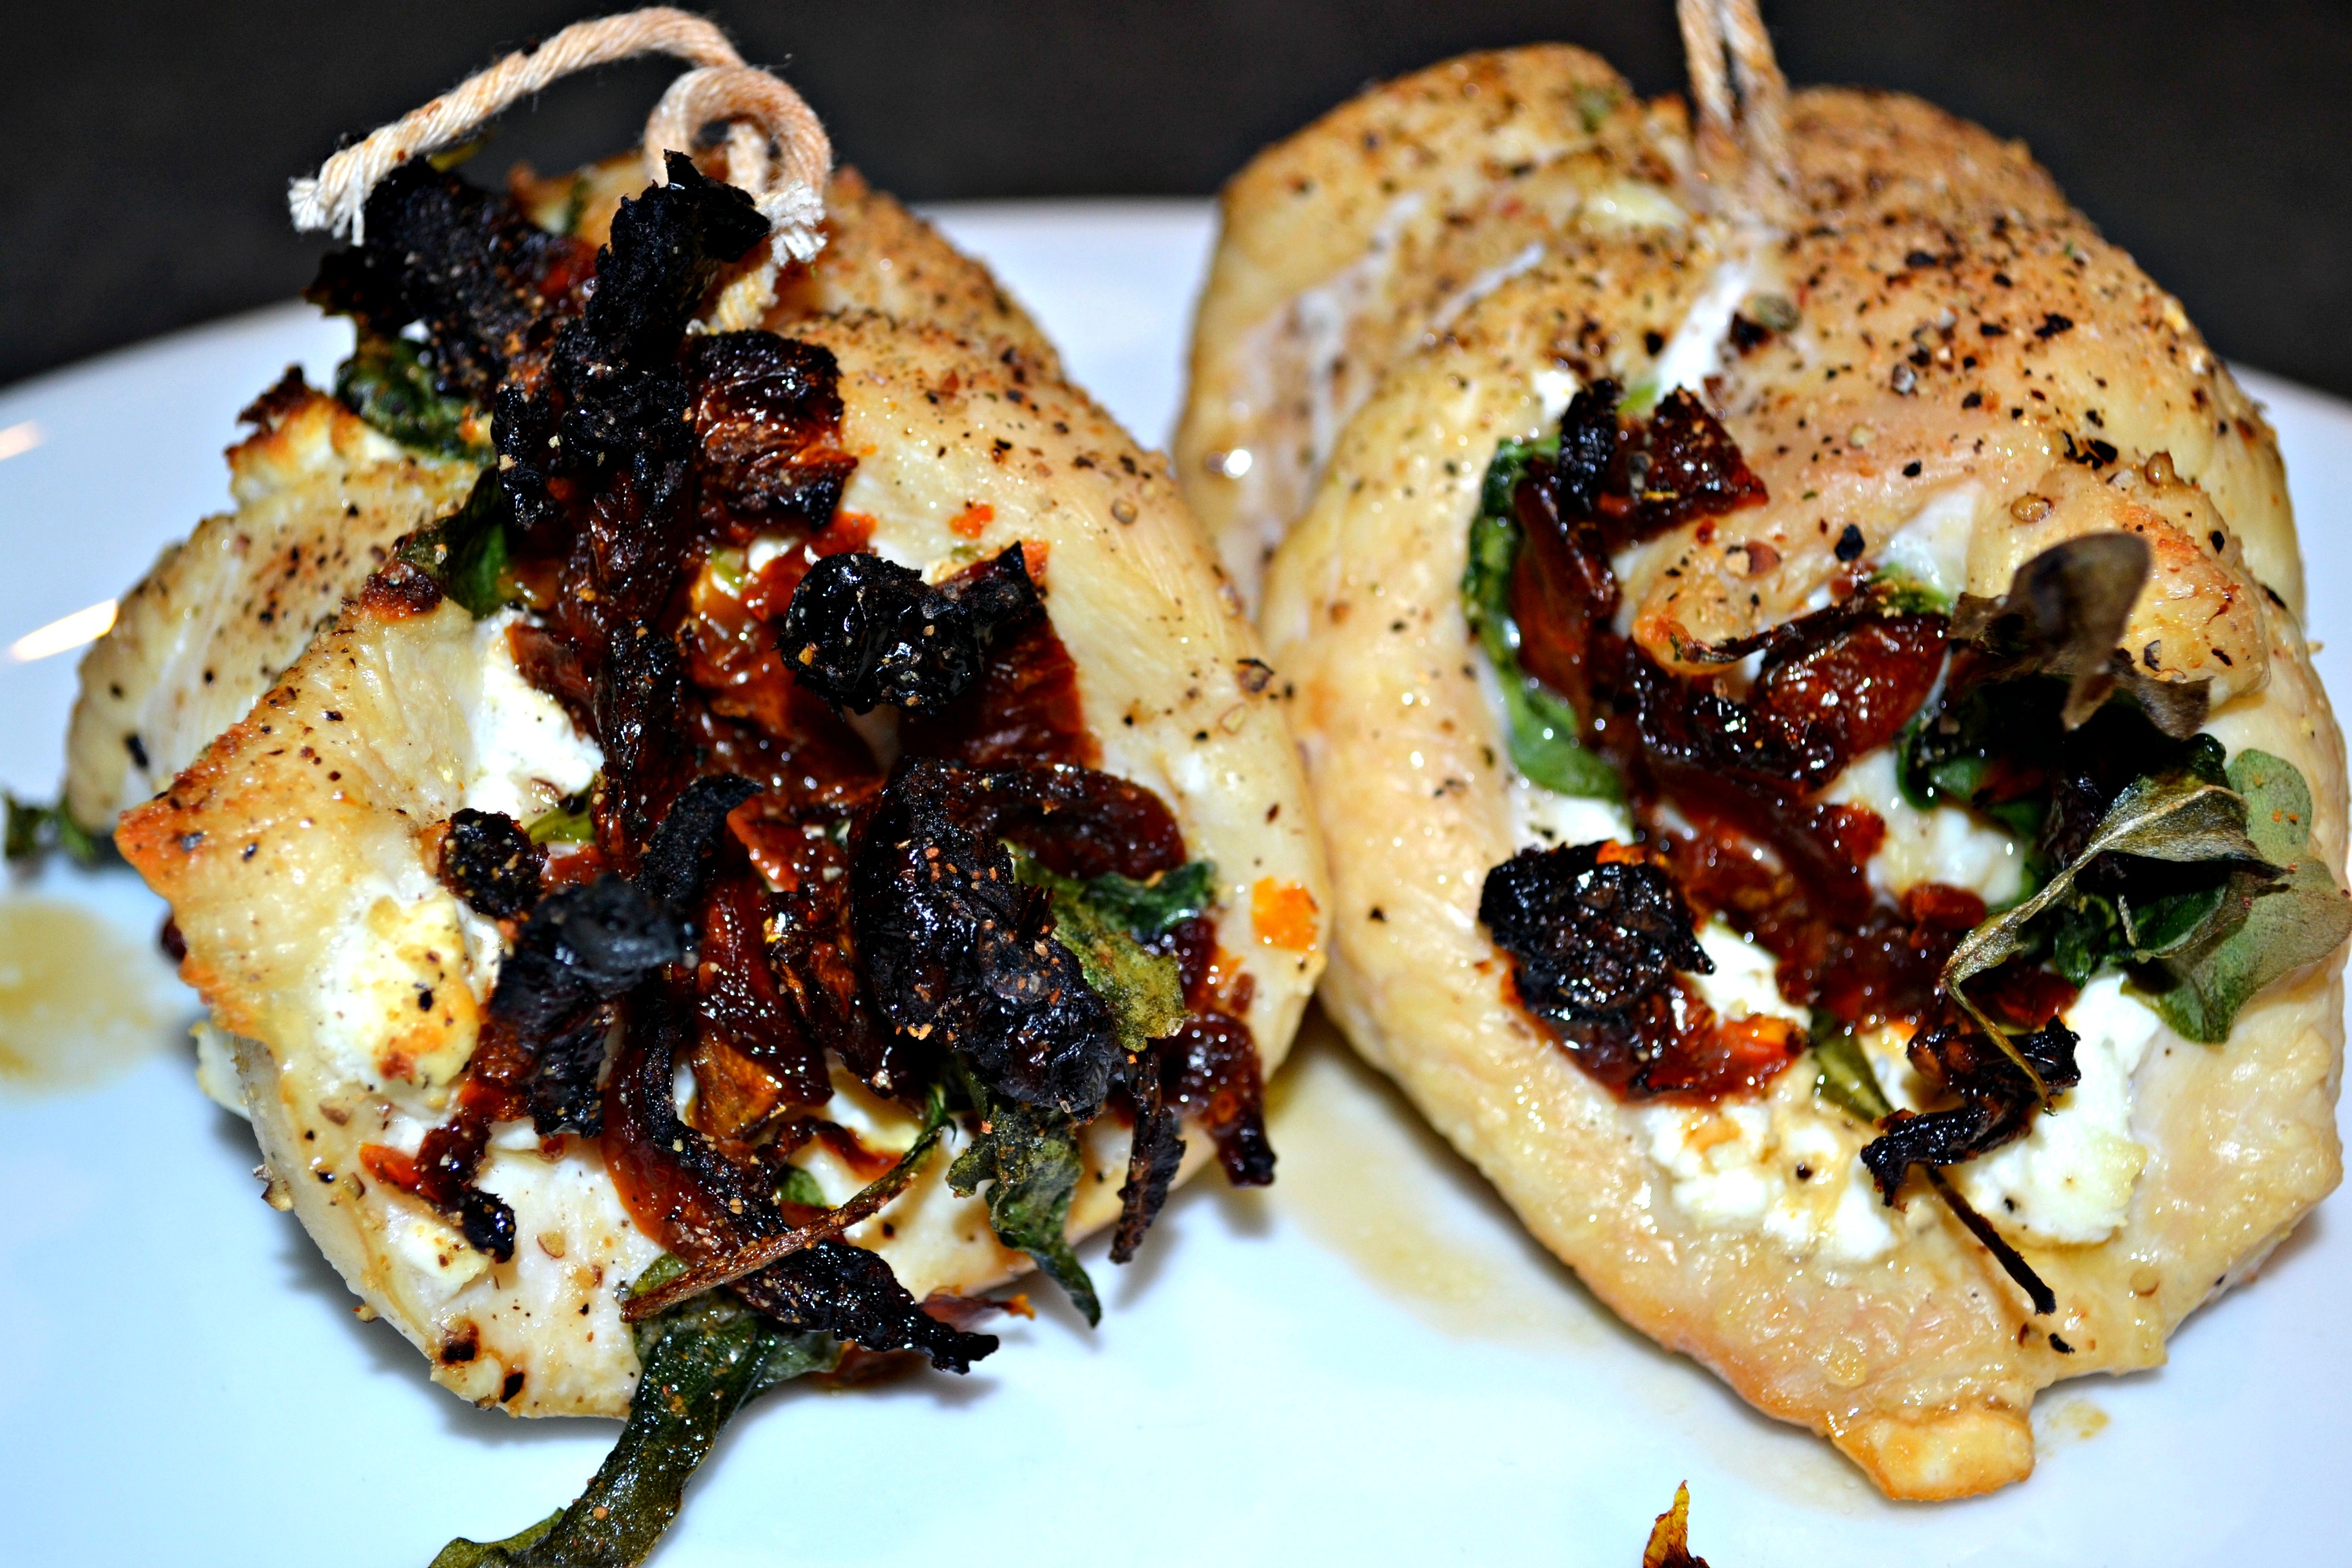 Sun-Dried Tomato, Goat Cheese and Arugula Chicken Roulades